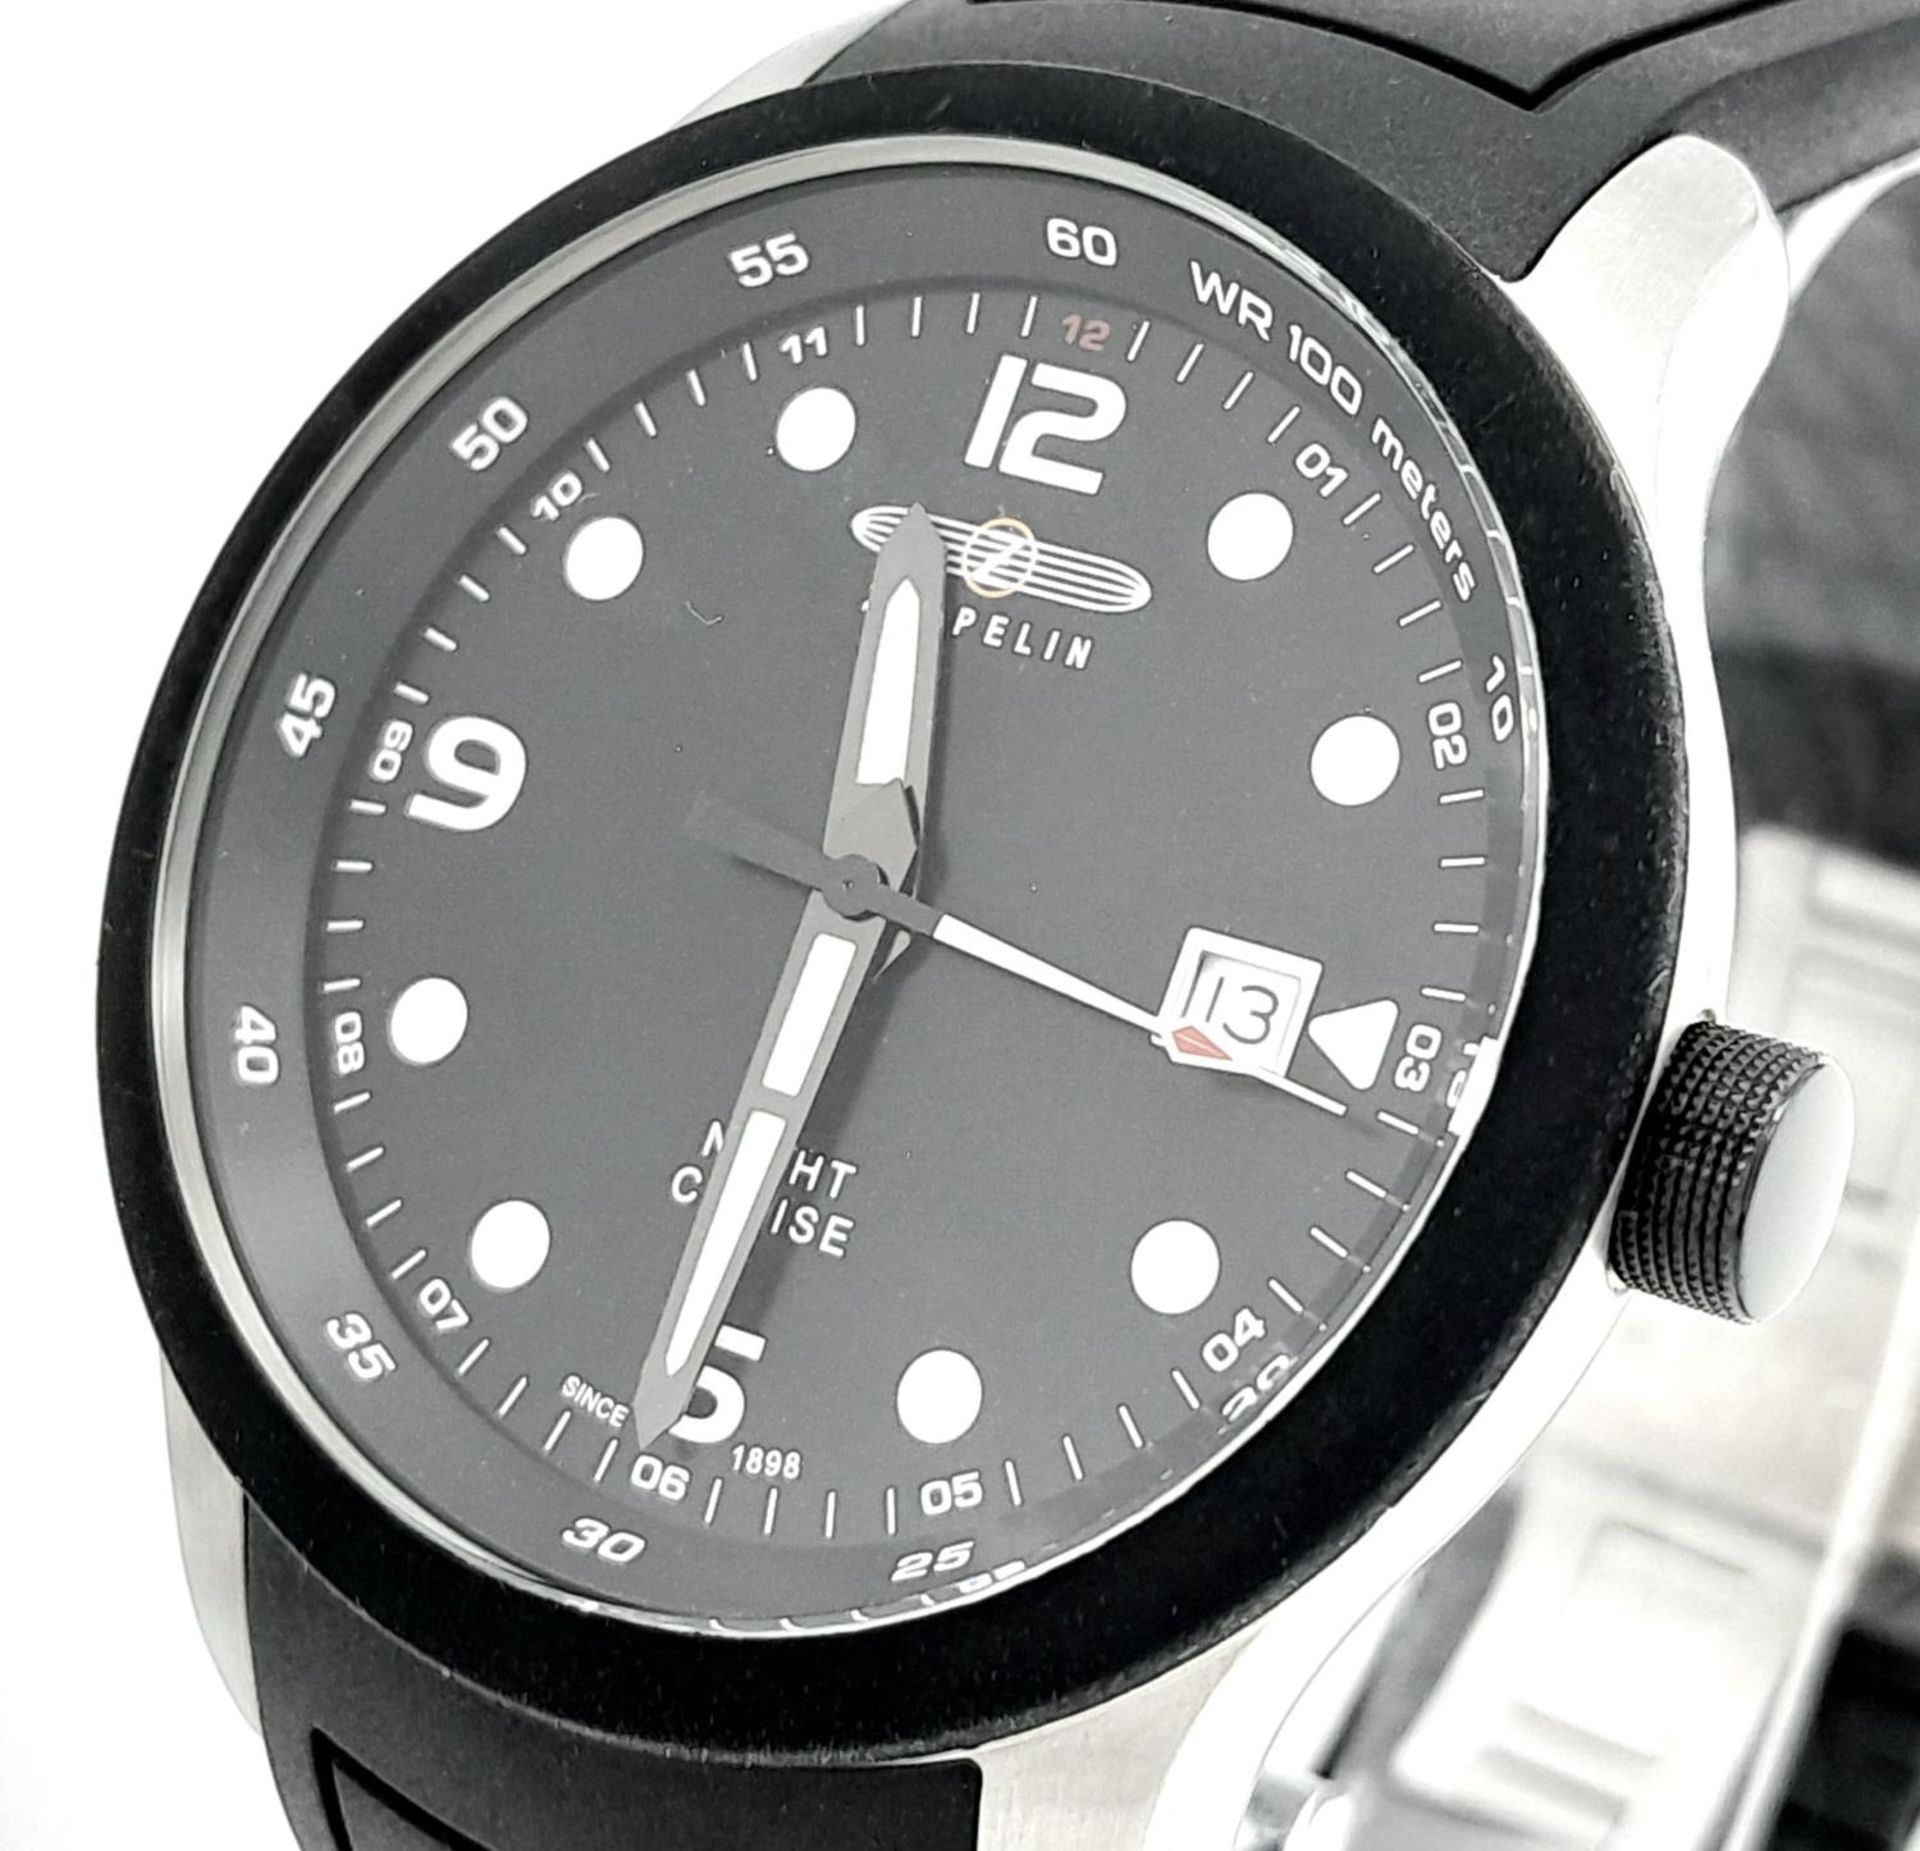 A Zeppelin Night Cruise Quartz Gents Watch. Black rubber strap. Stainless steel case - 42mm. Black - Image 2 of 6